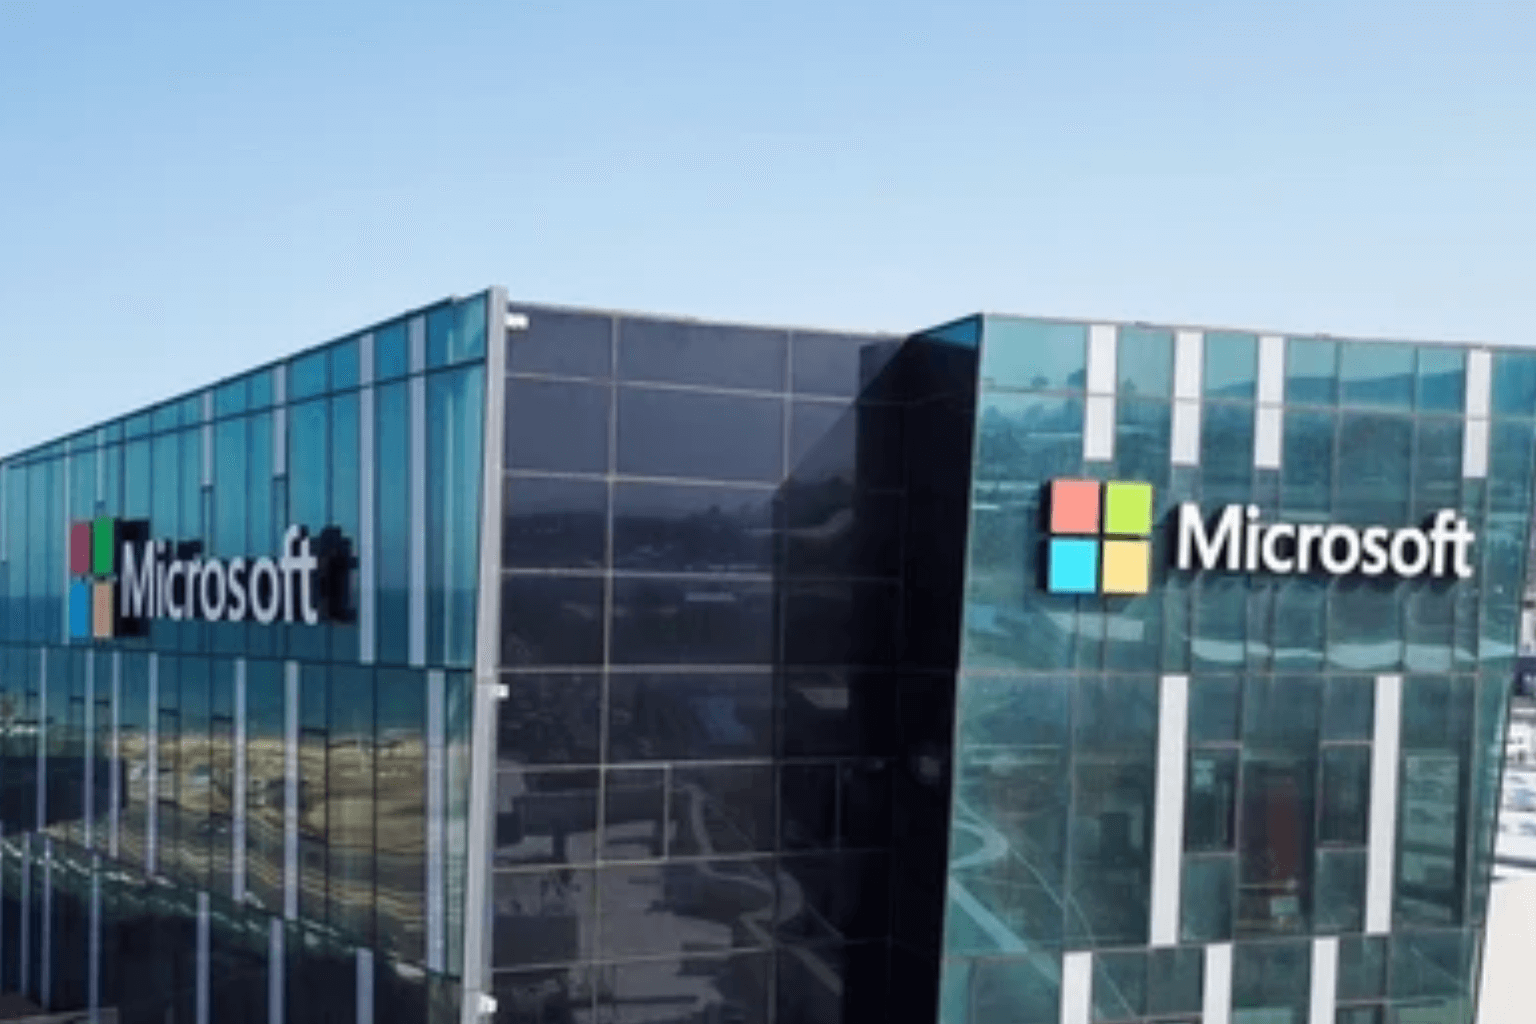 Microsoft plans to invest $3.2 billion in Swedish cloud and AI